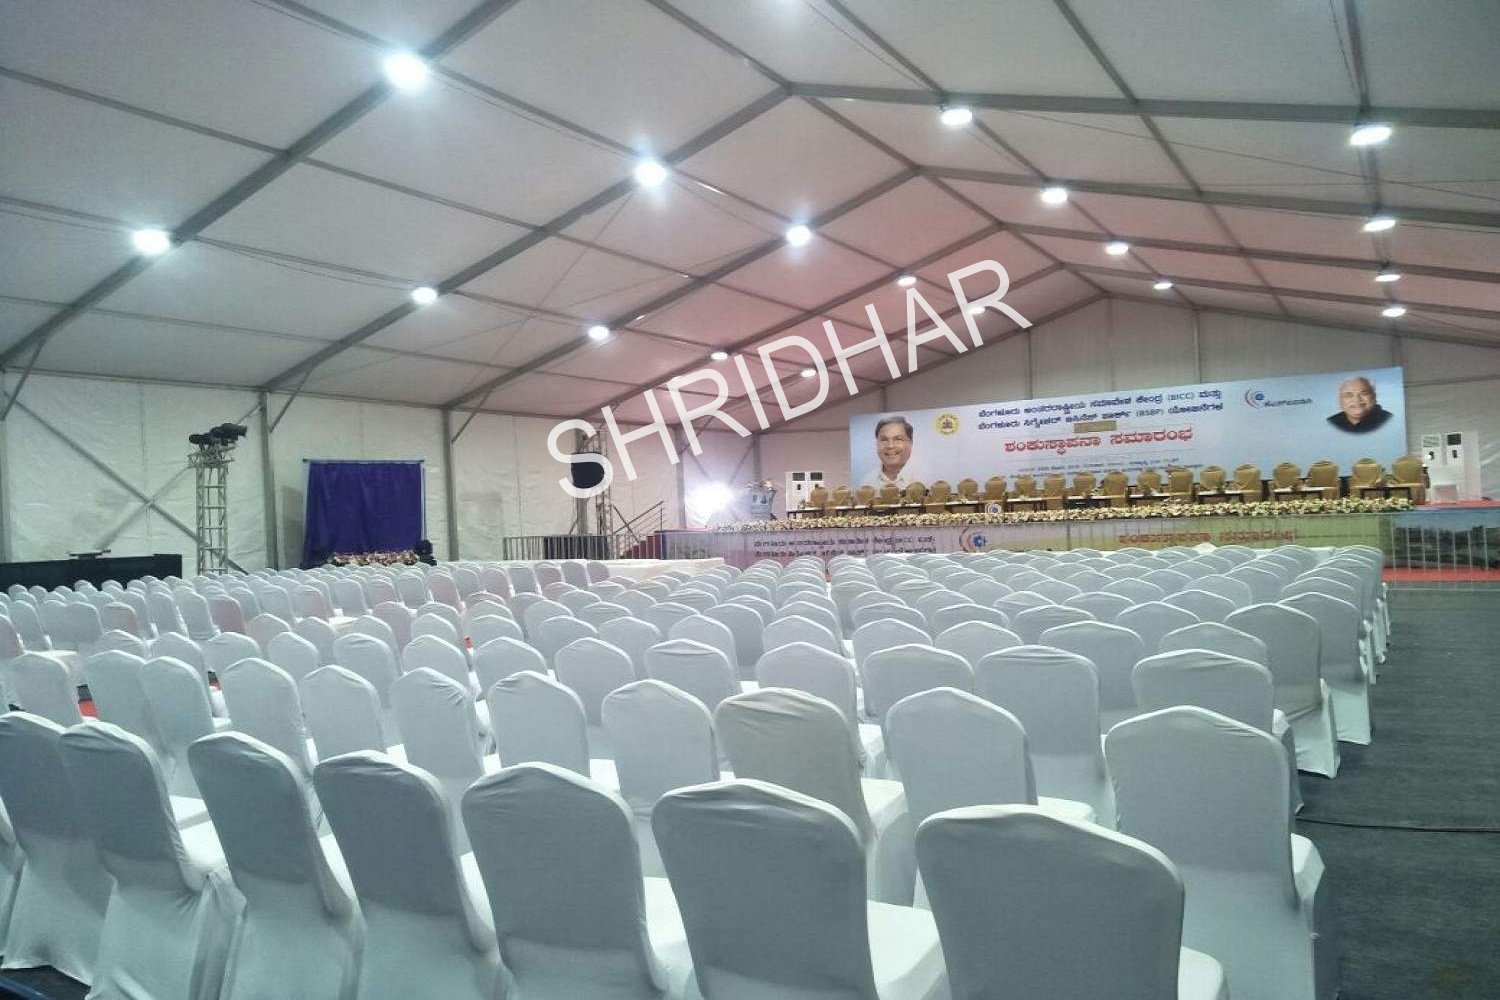 tents chairs wooden stages and lighting for rent for conferences in bangalore shridhar tent house